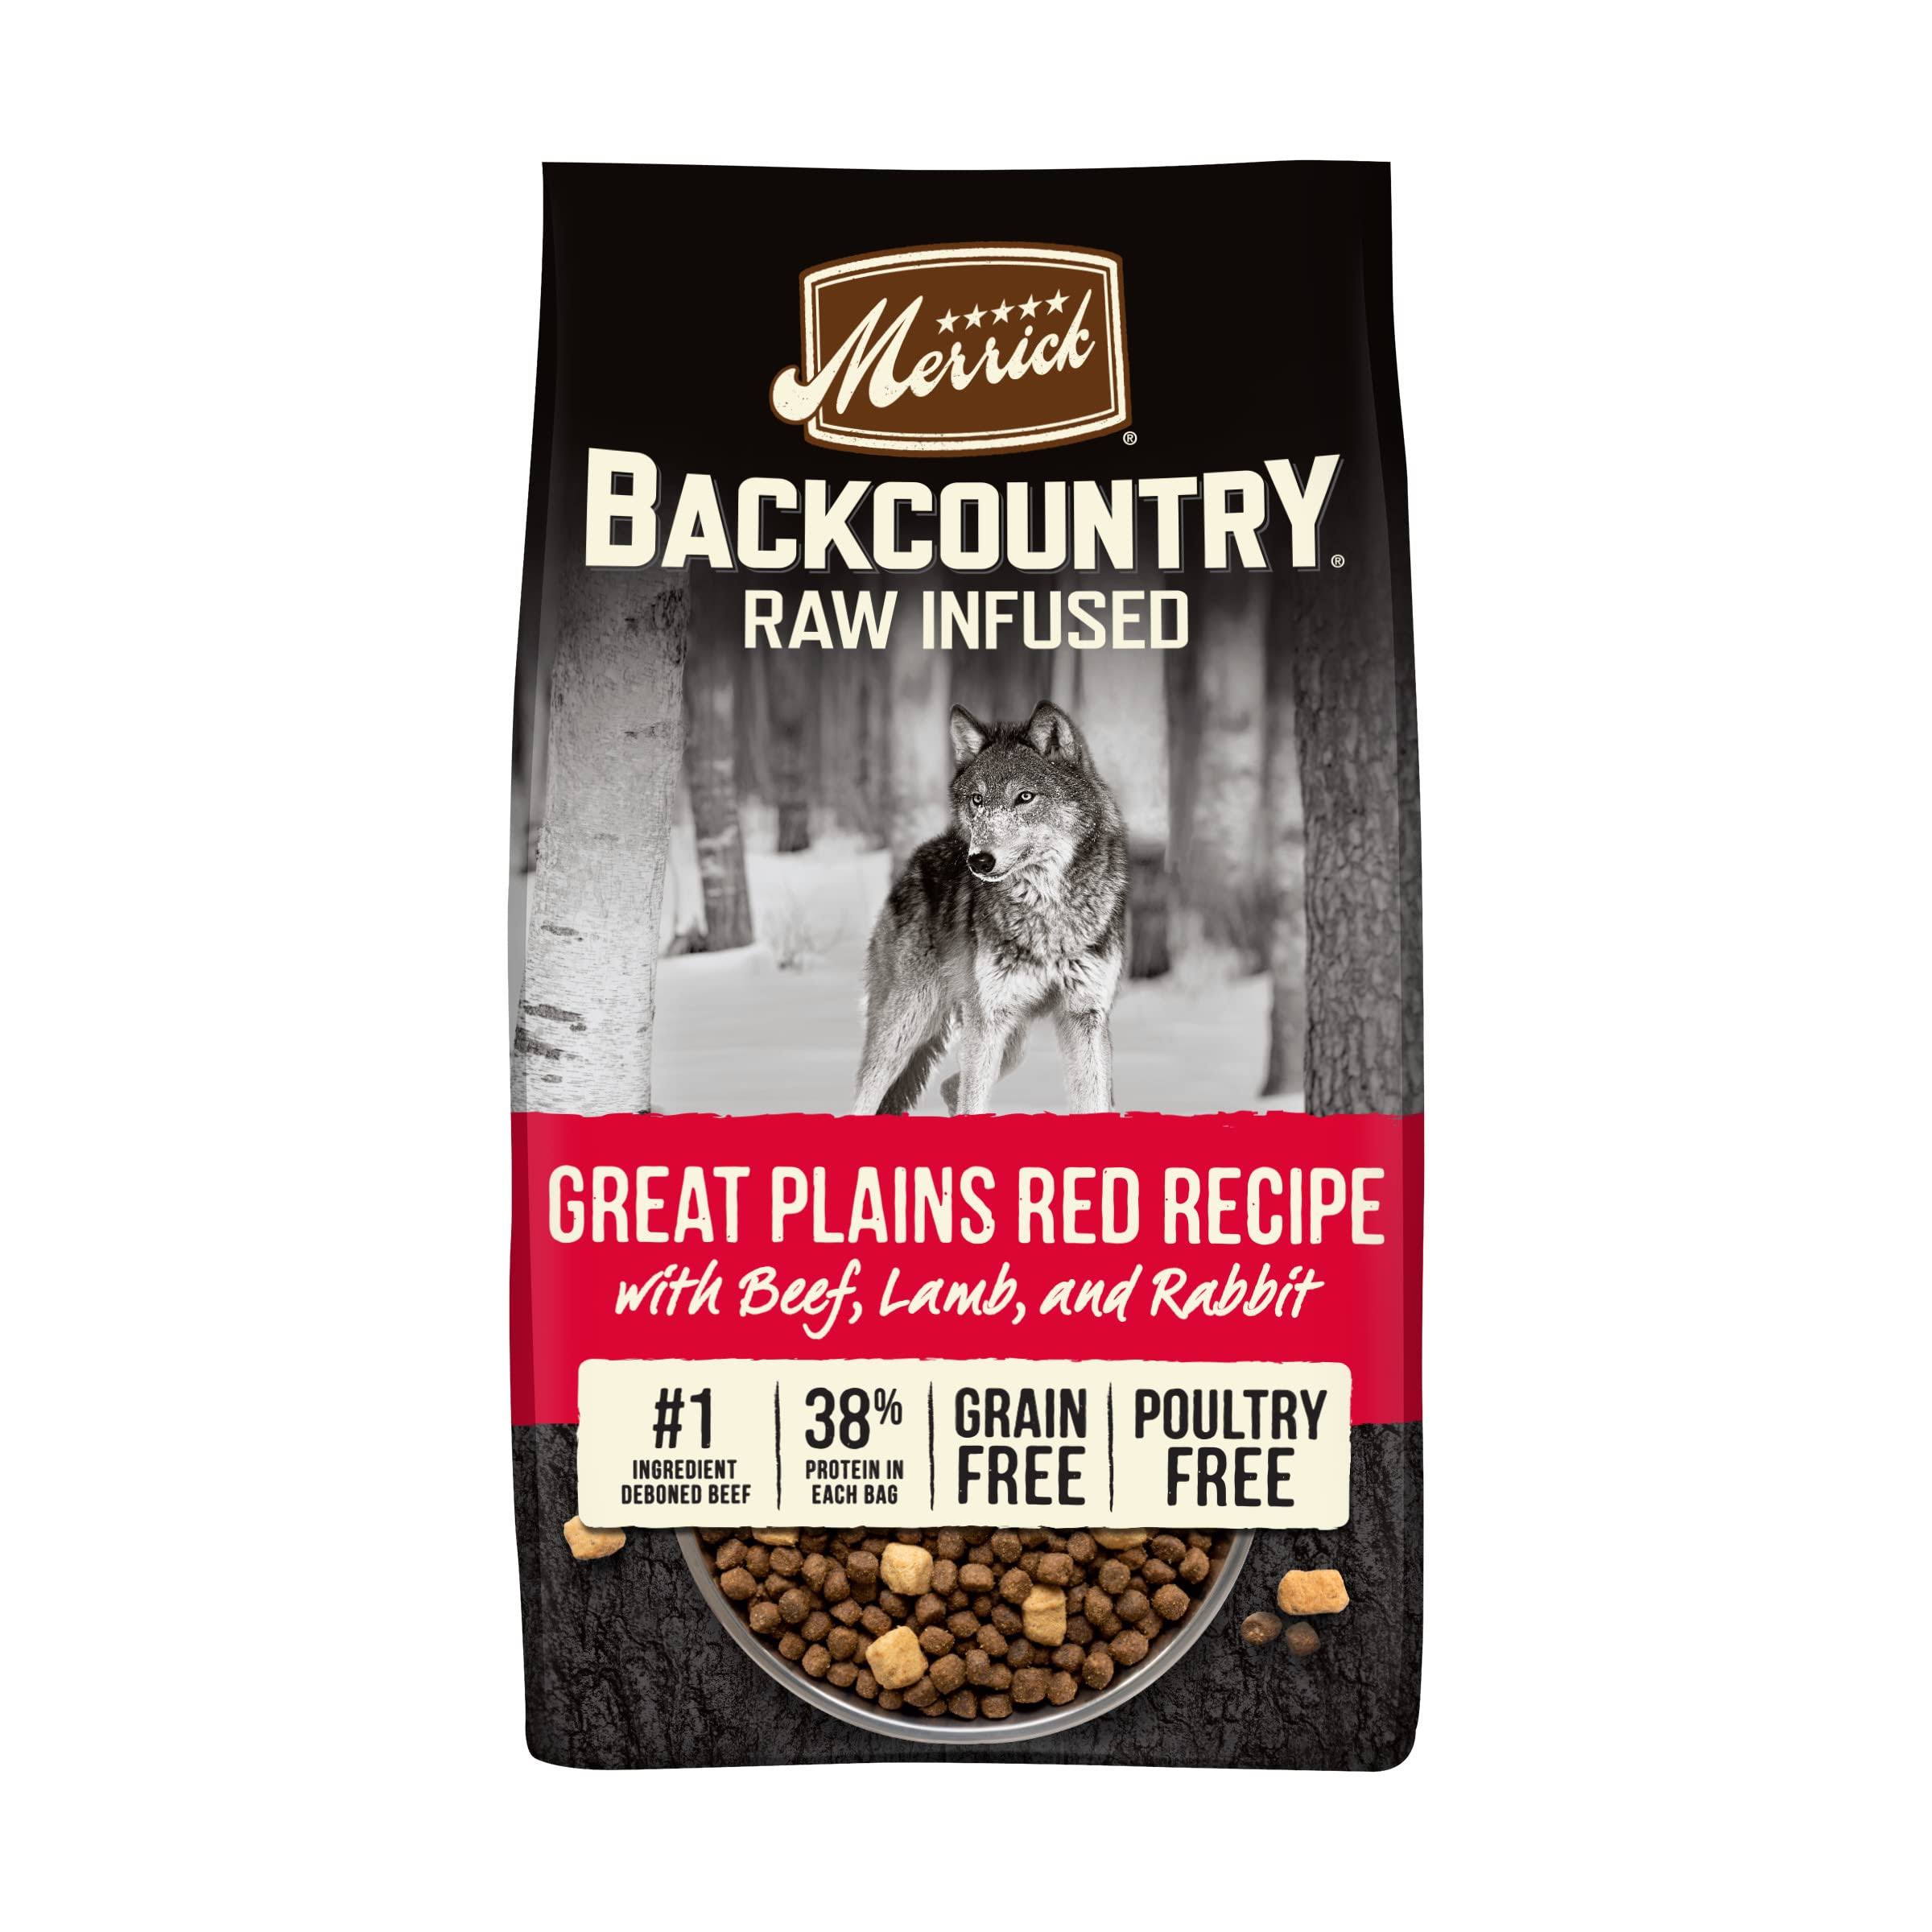 Merrick Backcountry Raw Infused Grain Free Great Plains Red Recipe Dry Dog Food, 4 lbs